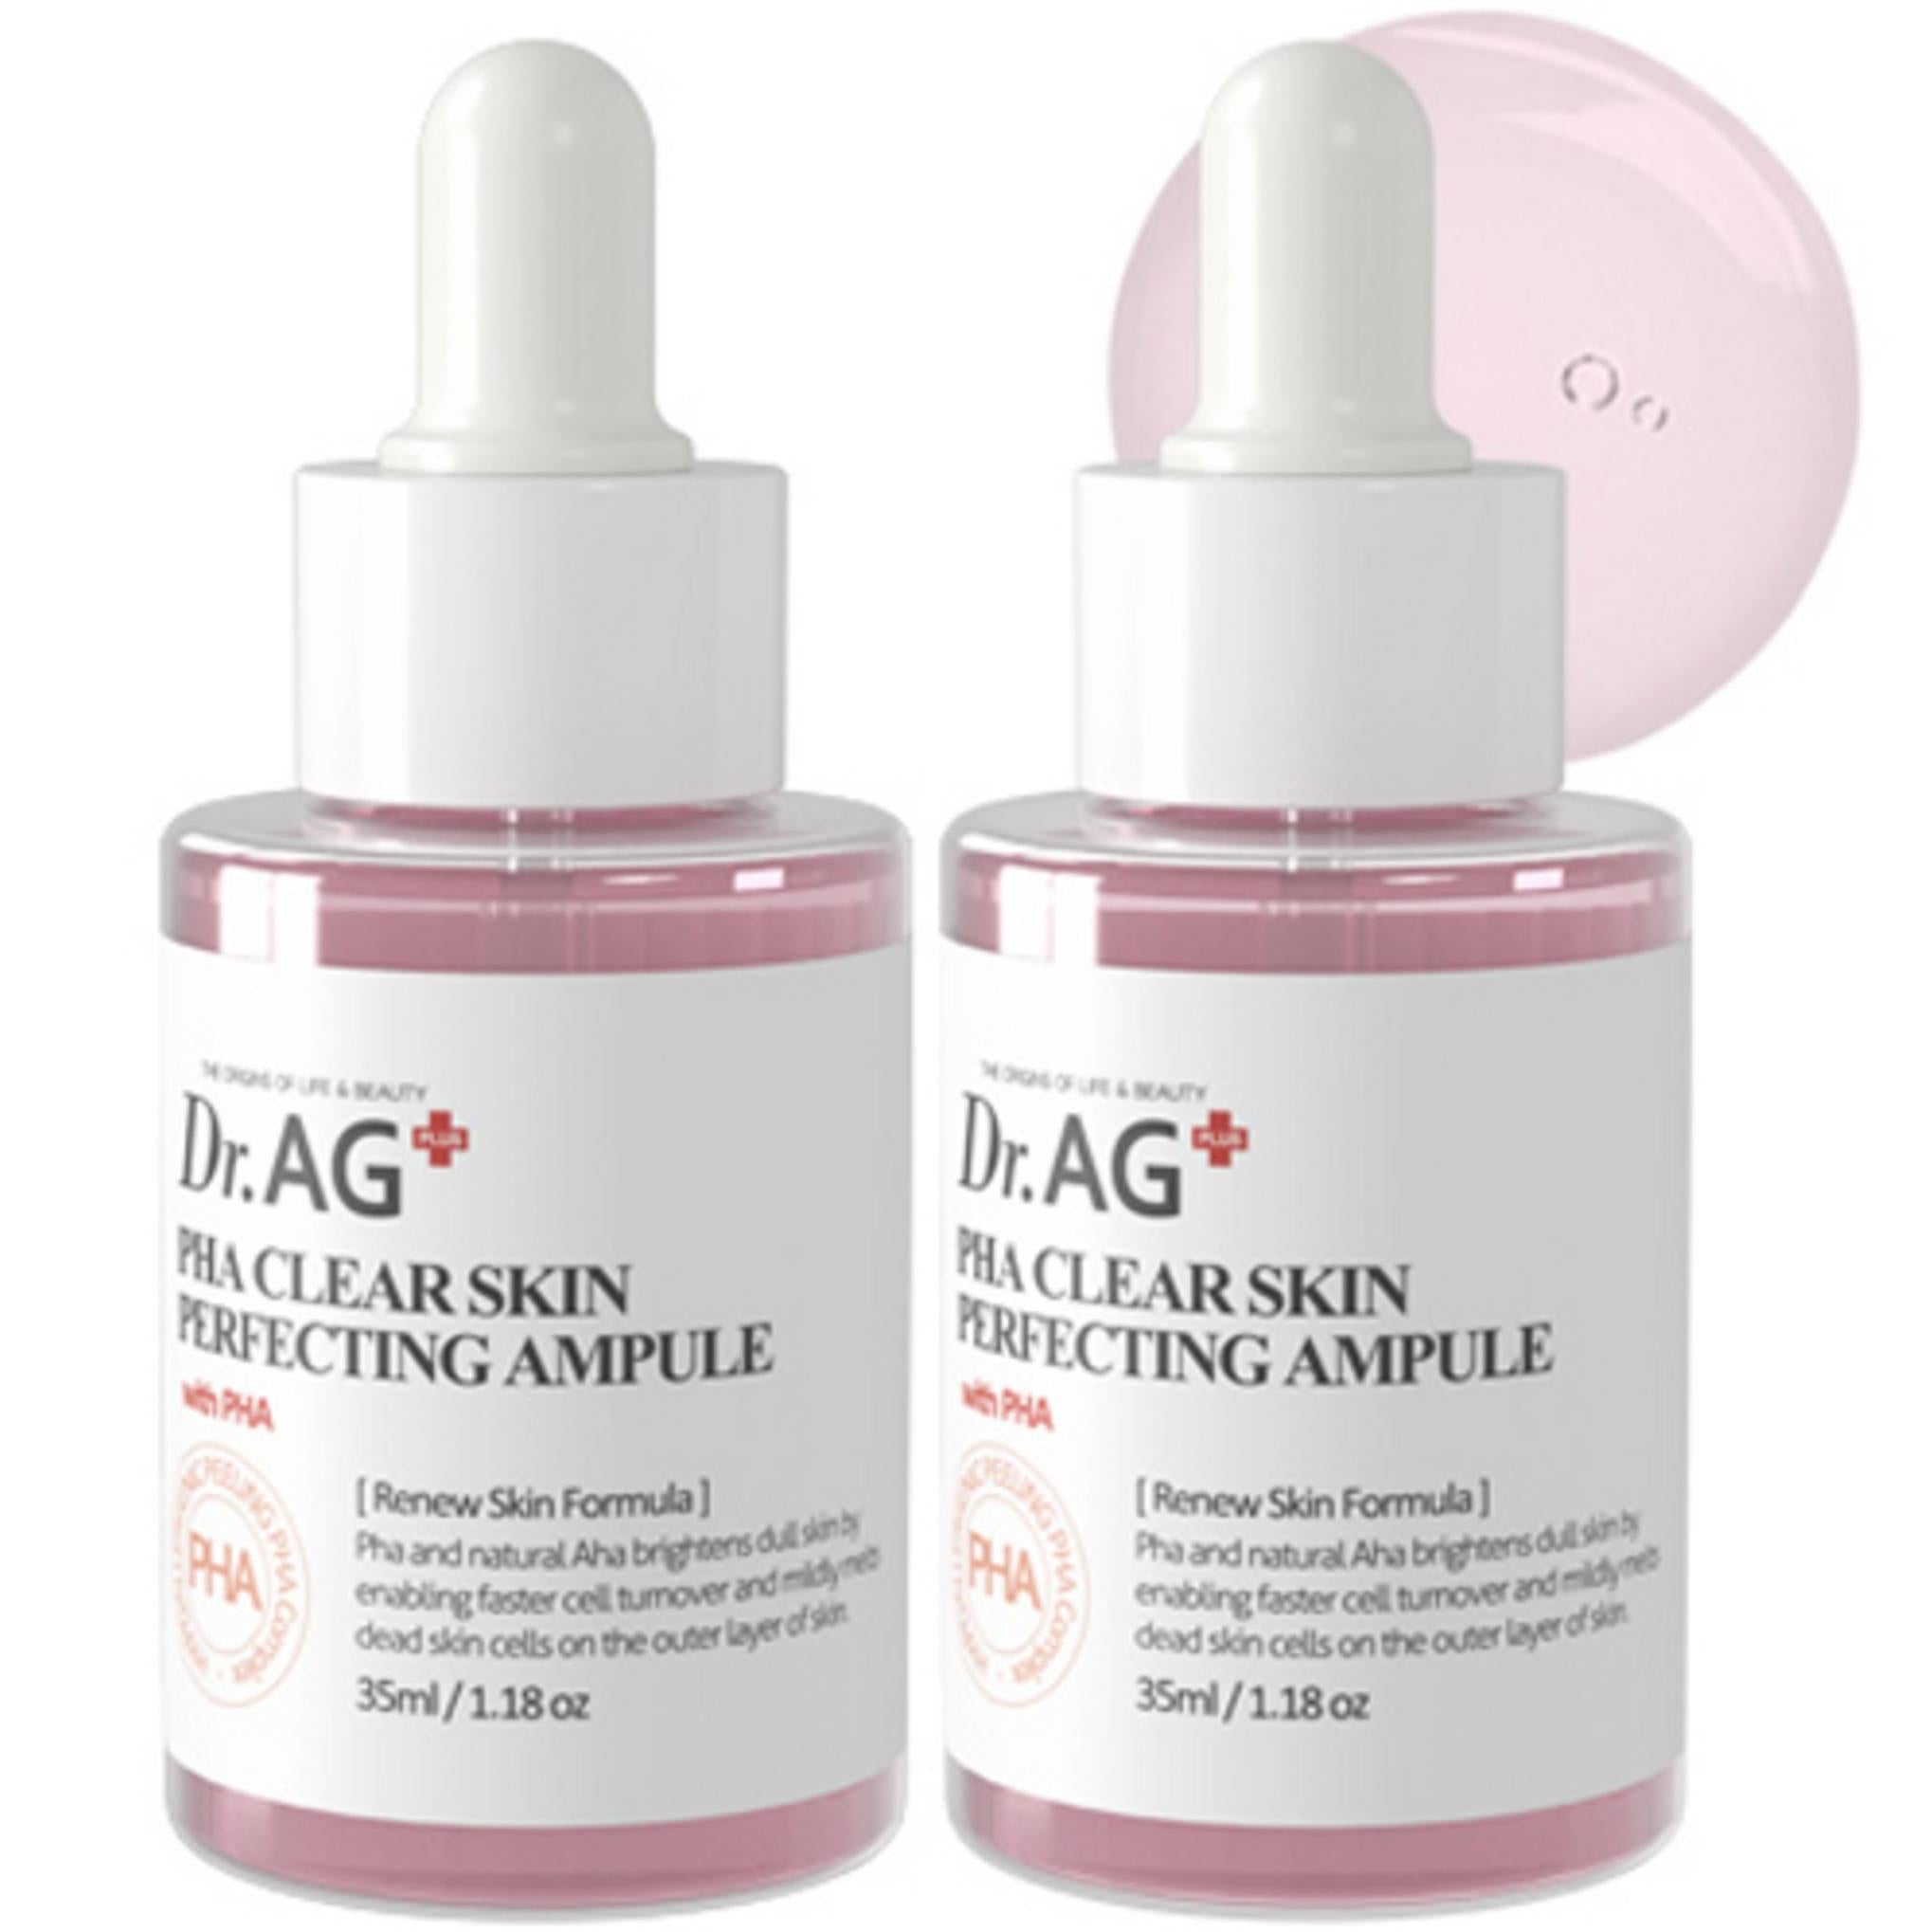 Dr.Age PAHA Clear Skin Perfecting Ampoule